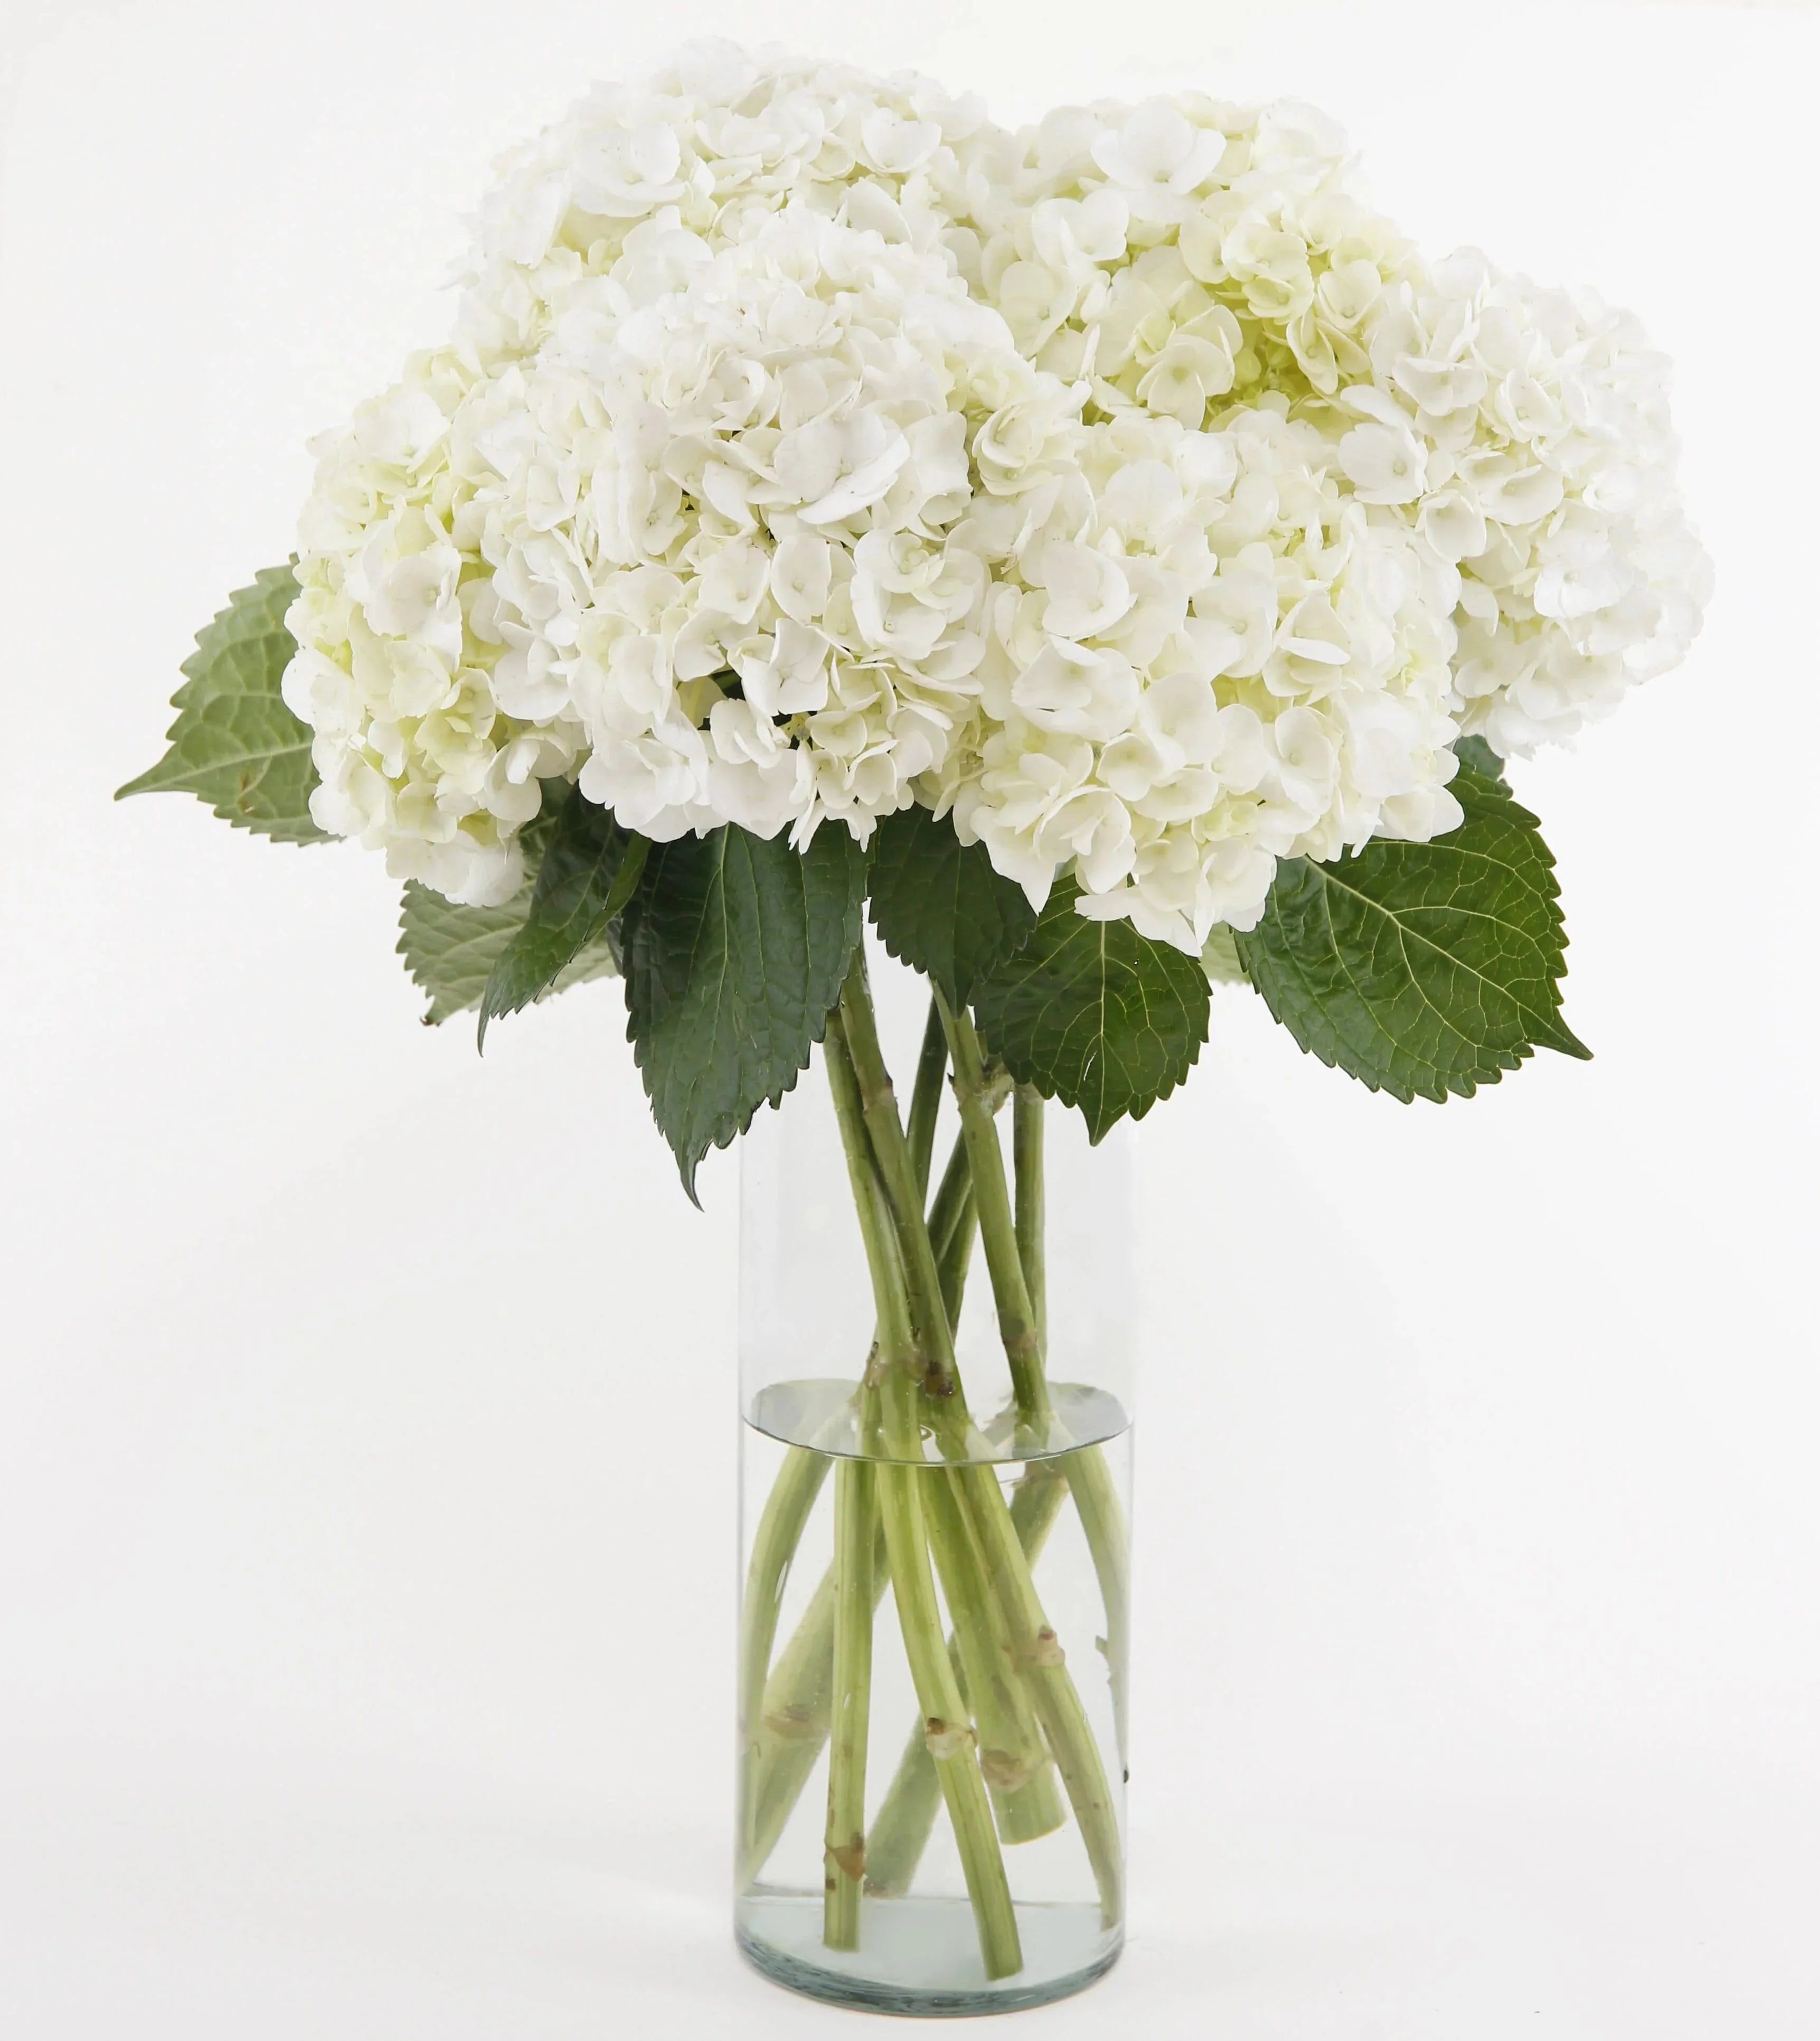 Image of White hydrangea bouquet for sale